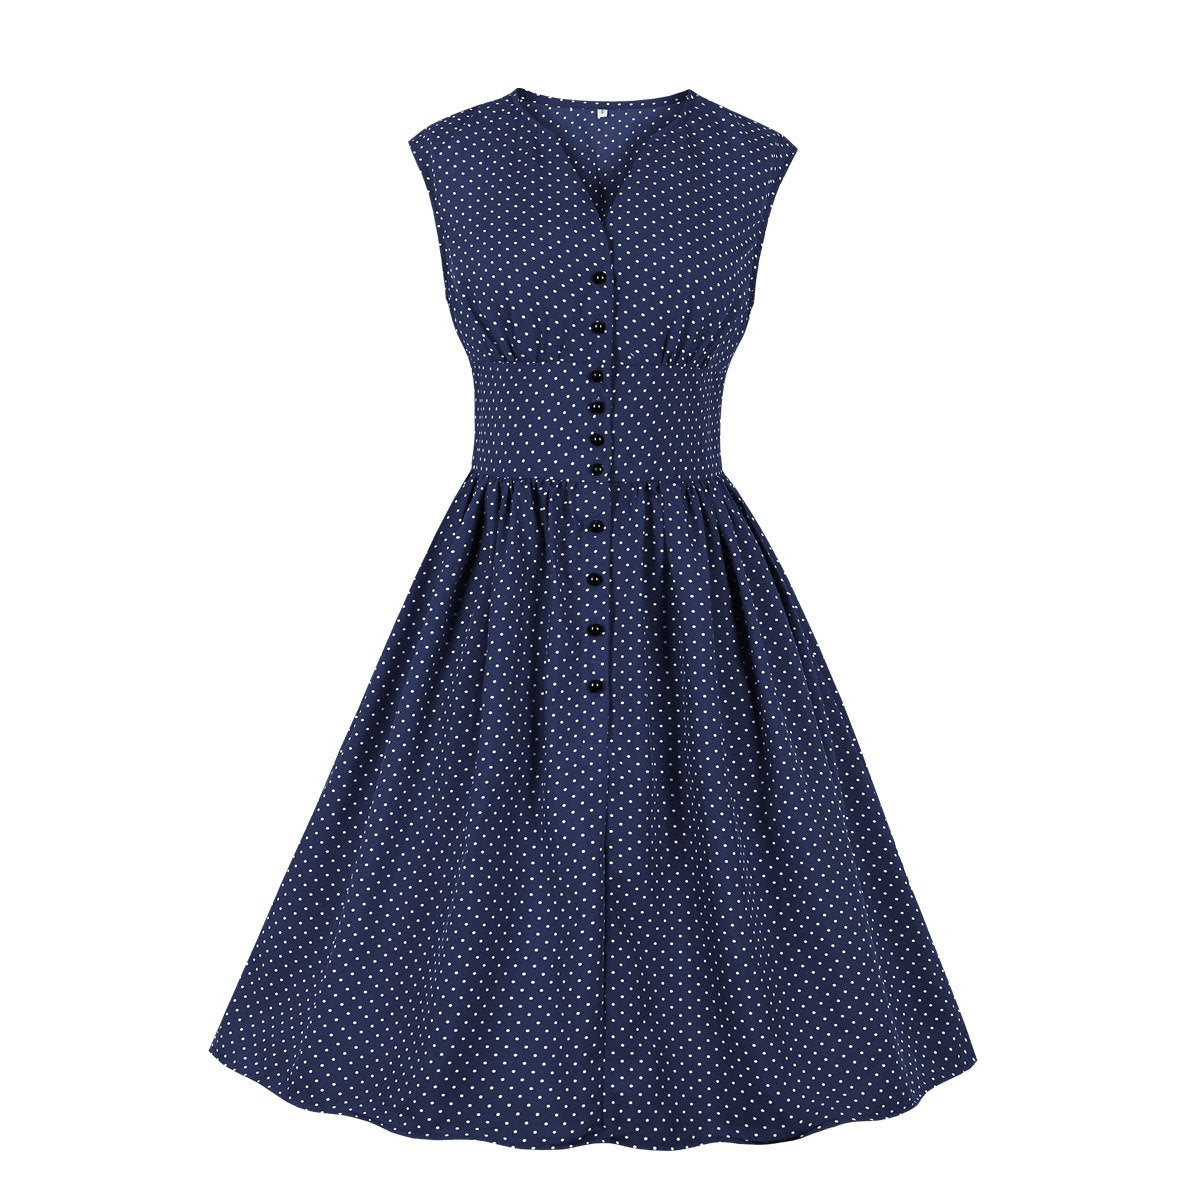 Women Sleeveless V Neck Dot Print Vintage Dresses with Buttons-Vintage Dresses-Dark Blue-S-Free Shipping at meselling99